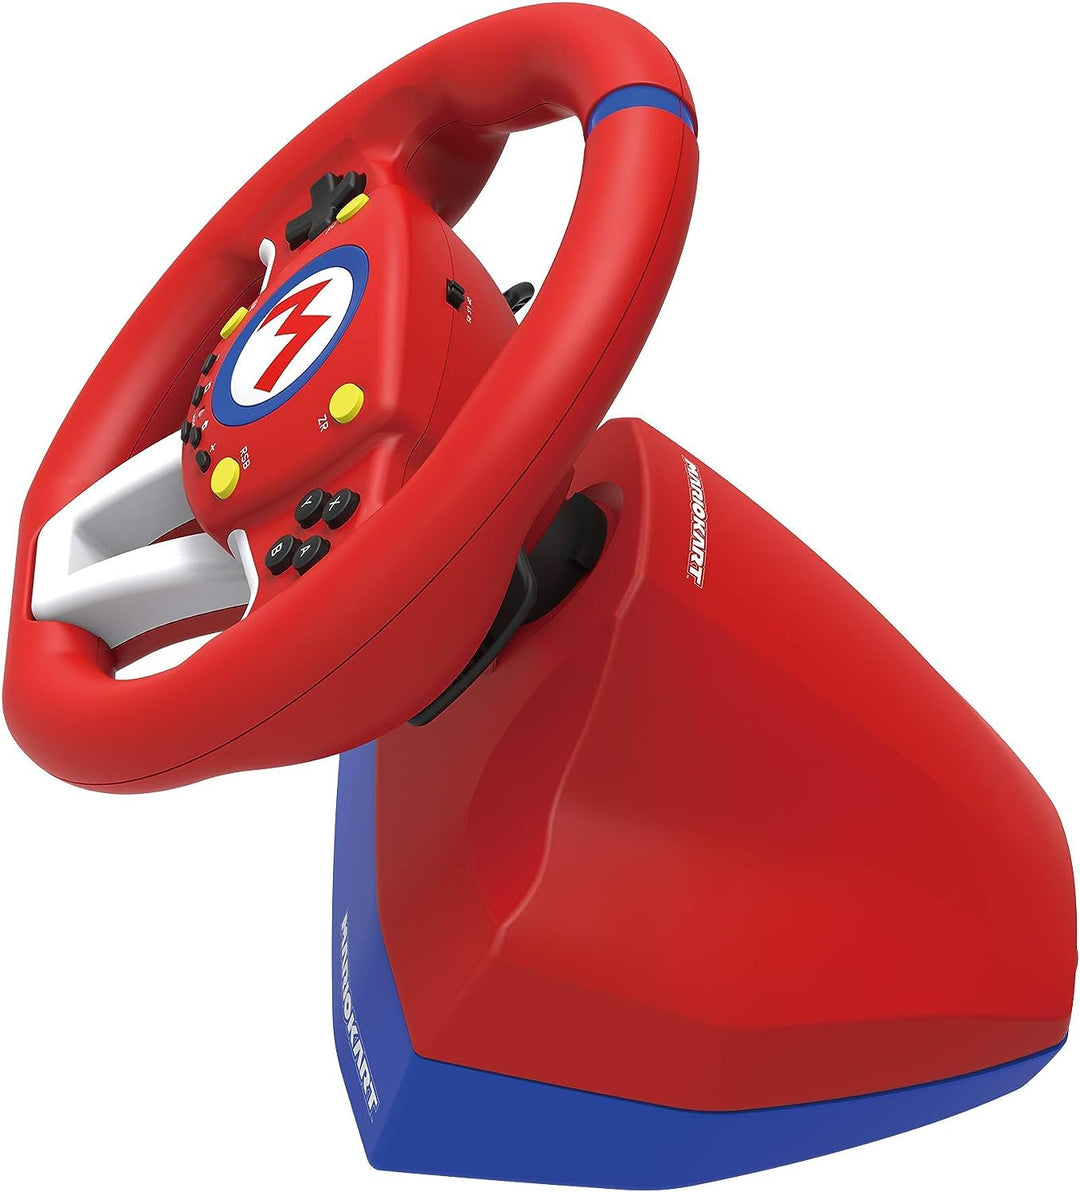 Hori | Racing Wheel Pro Mini w/ Pedals Controller for Nintendo Switch - Mario Kart Red  |